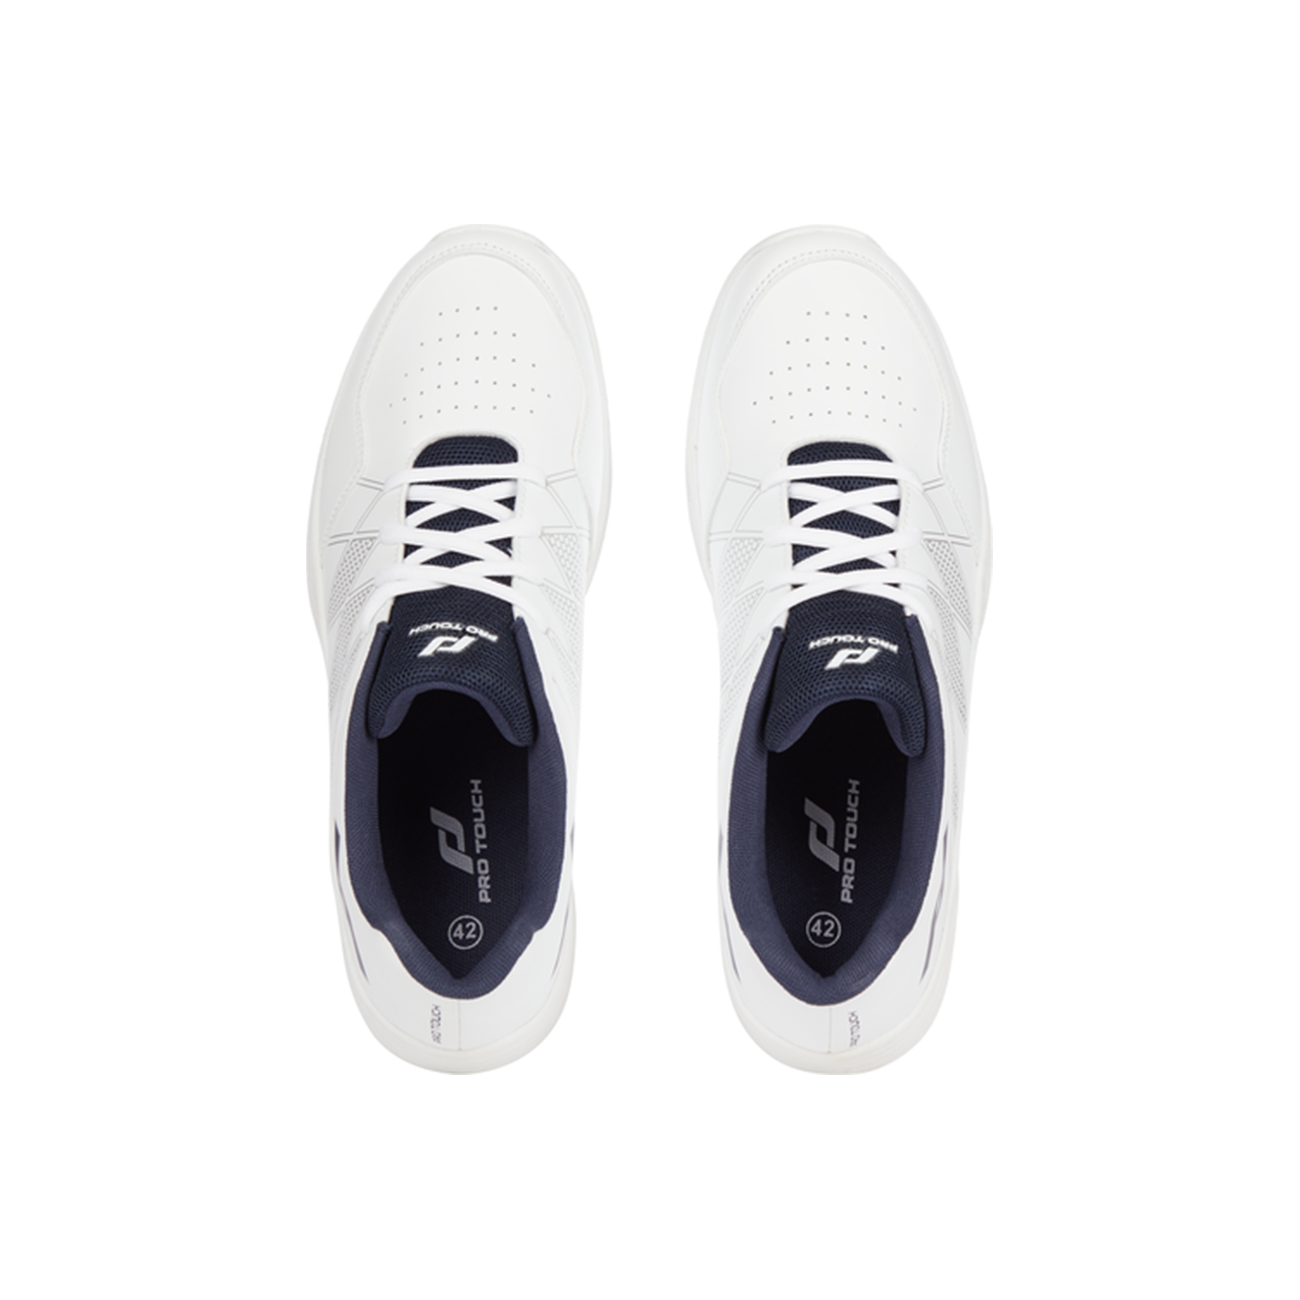 Pro Touch Rival Tennis Shoes For Men, White & Navy